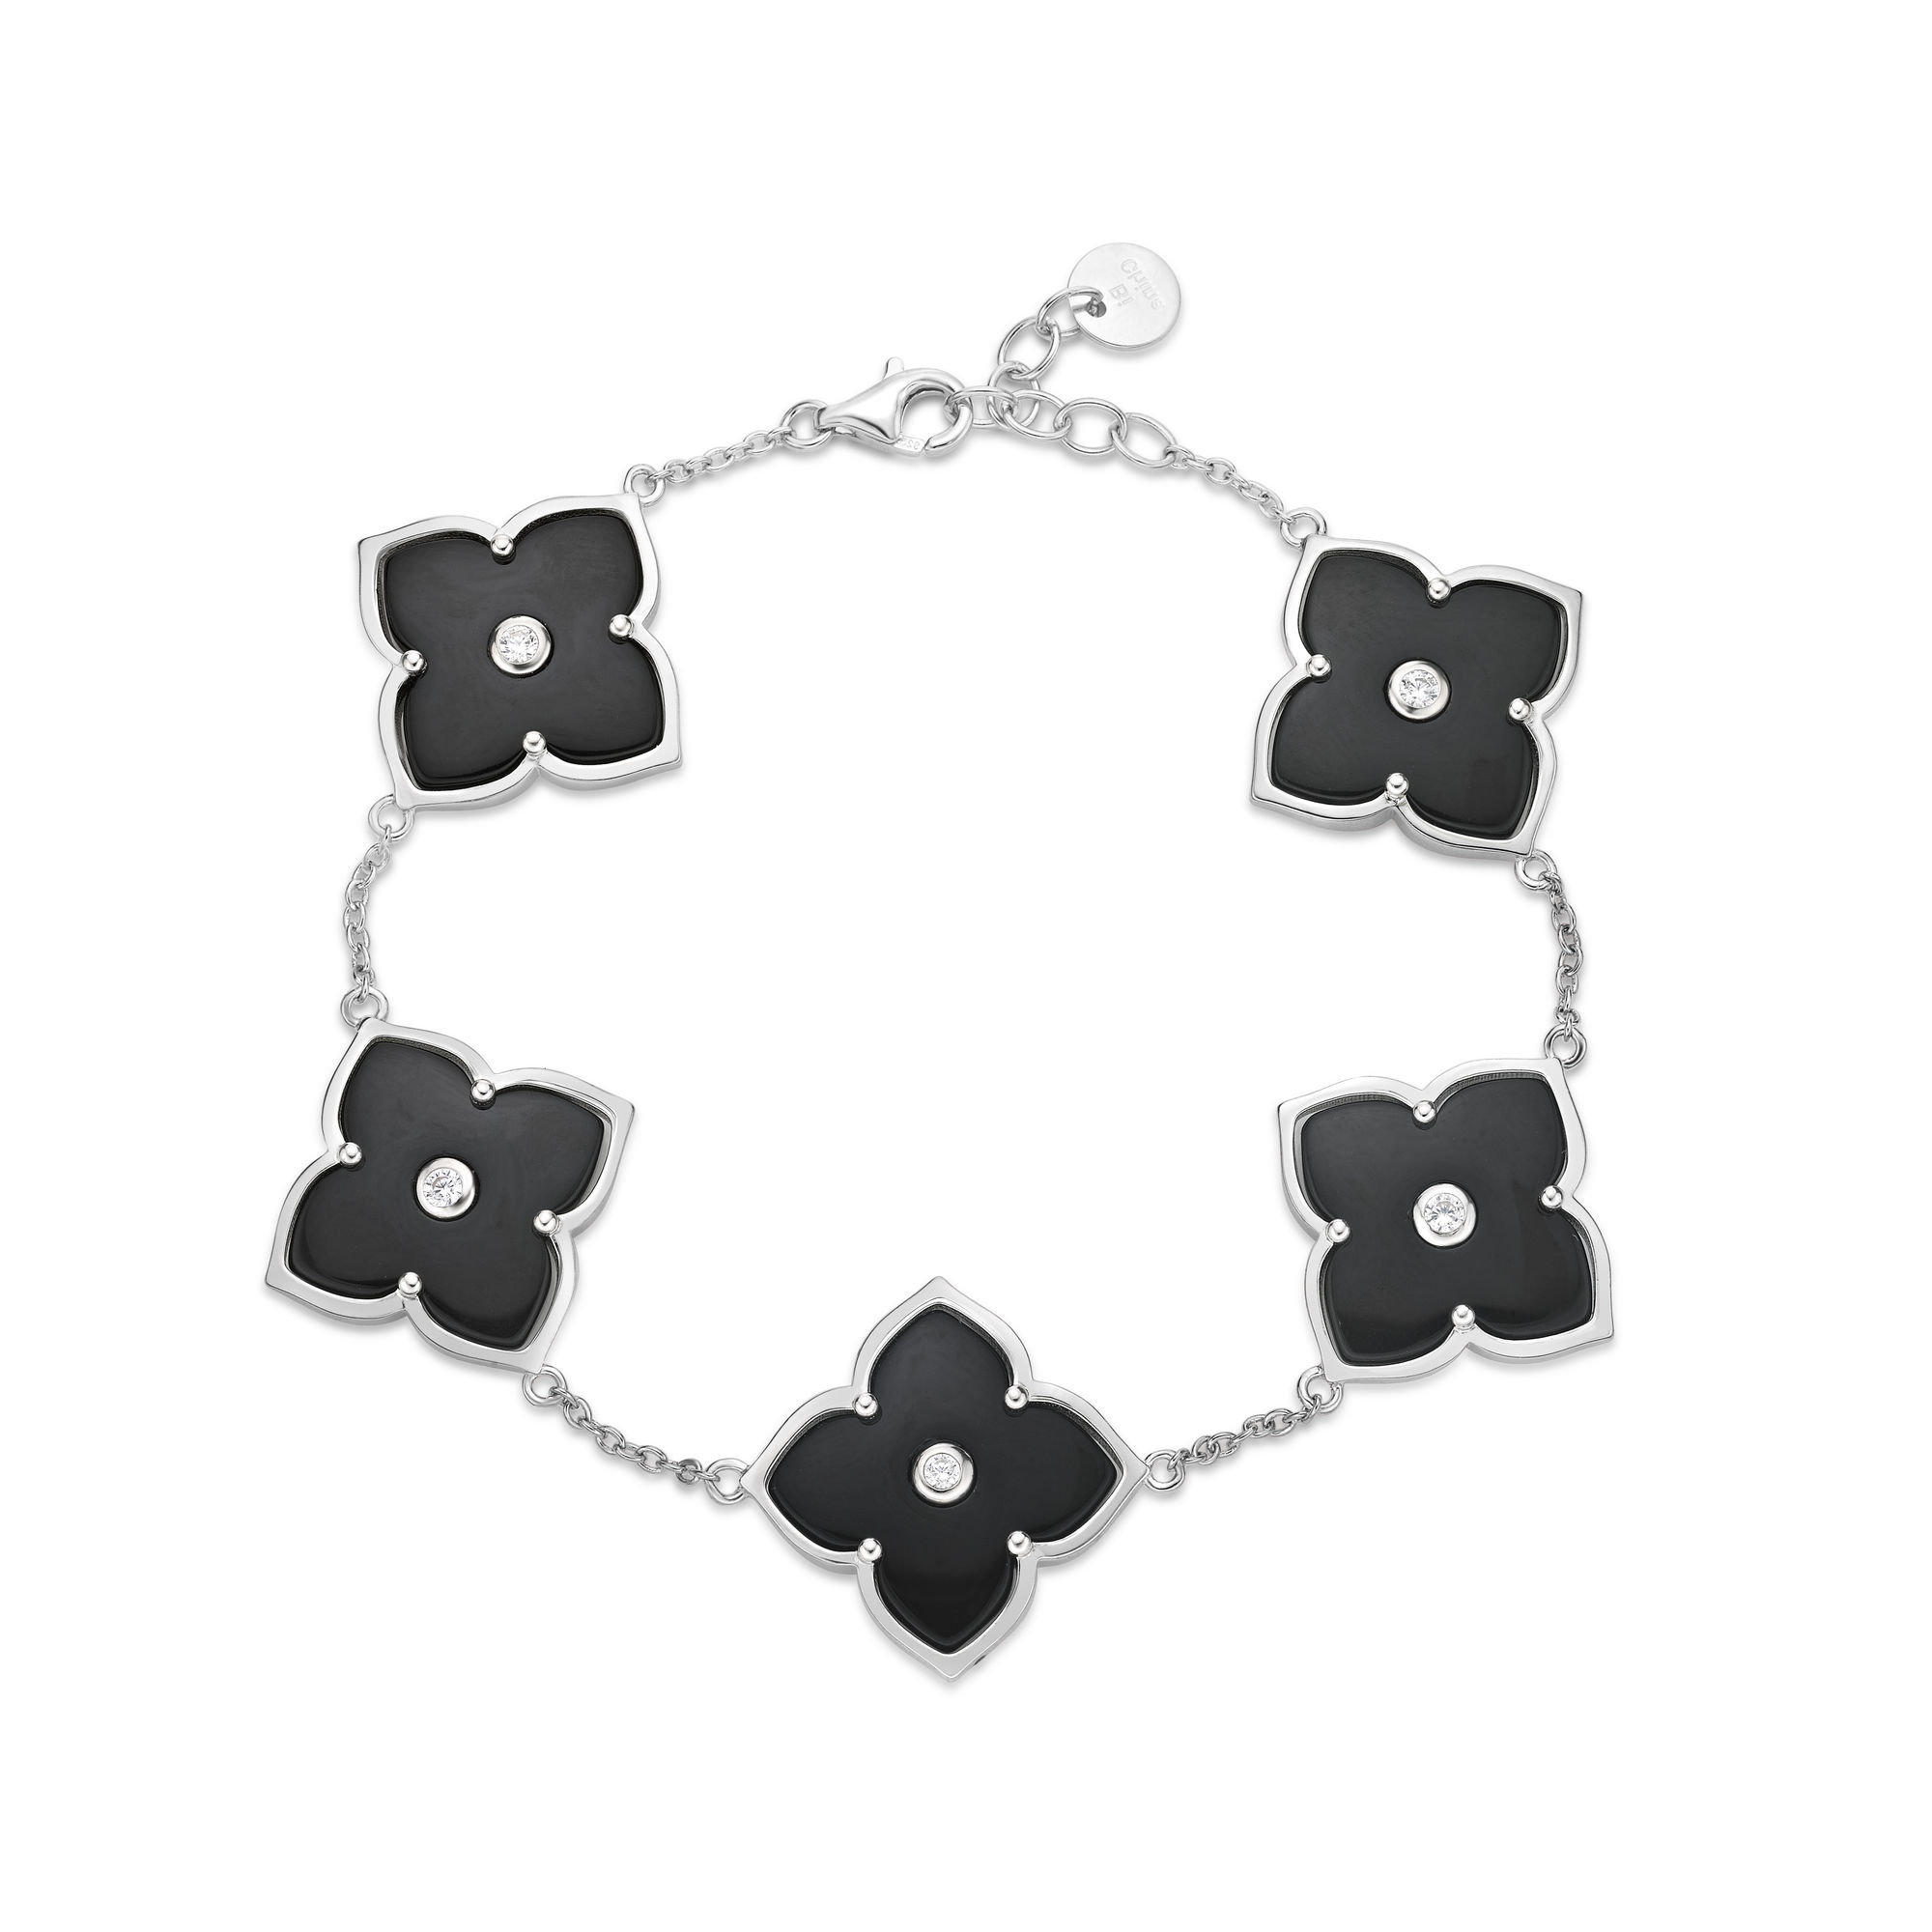 Women's Black Onyx Five-Station Flower Bracelet in 925 Sterling Silver with Cubic Zirconia - 7-8 Inch Adjustable Cable Chain - Flora | Lavari Jewelers